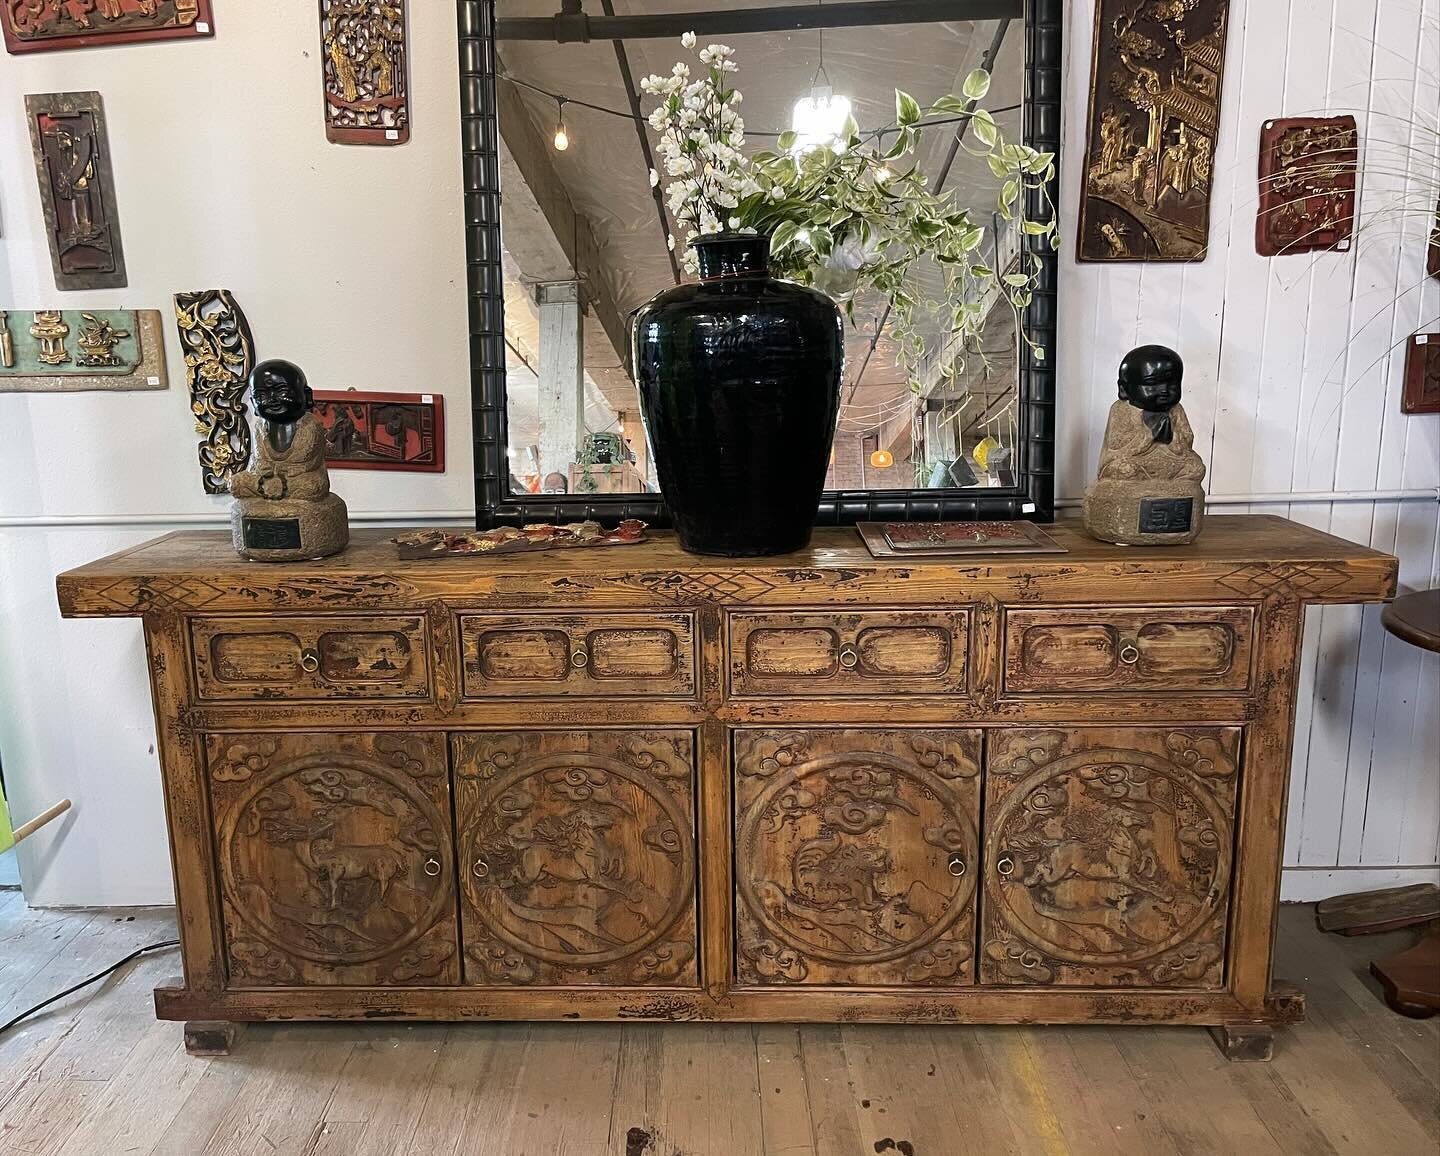 Large Mongolian sideboard cabinet with hand carved mythic animal motif.  Tons of storage in this beauty. 
Dimensions: W88&rdquo; x D17.5&rdquo; X H36&rdquo;
#oneofakindfurniture #interiordesign #asianantiques #homedecor #designideas